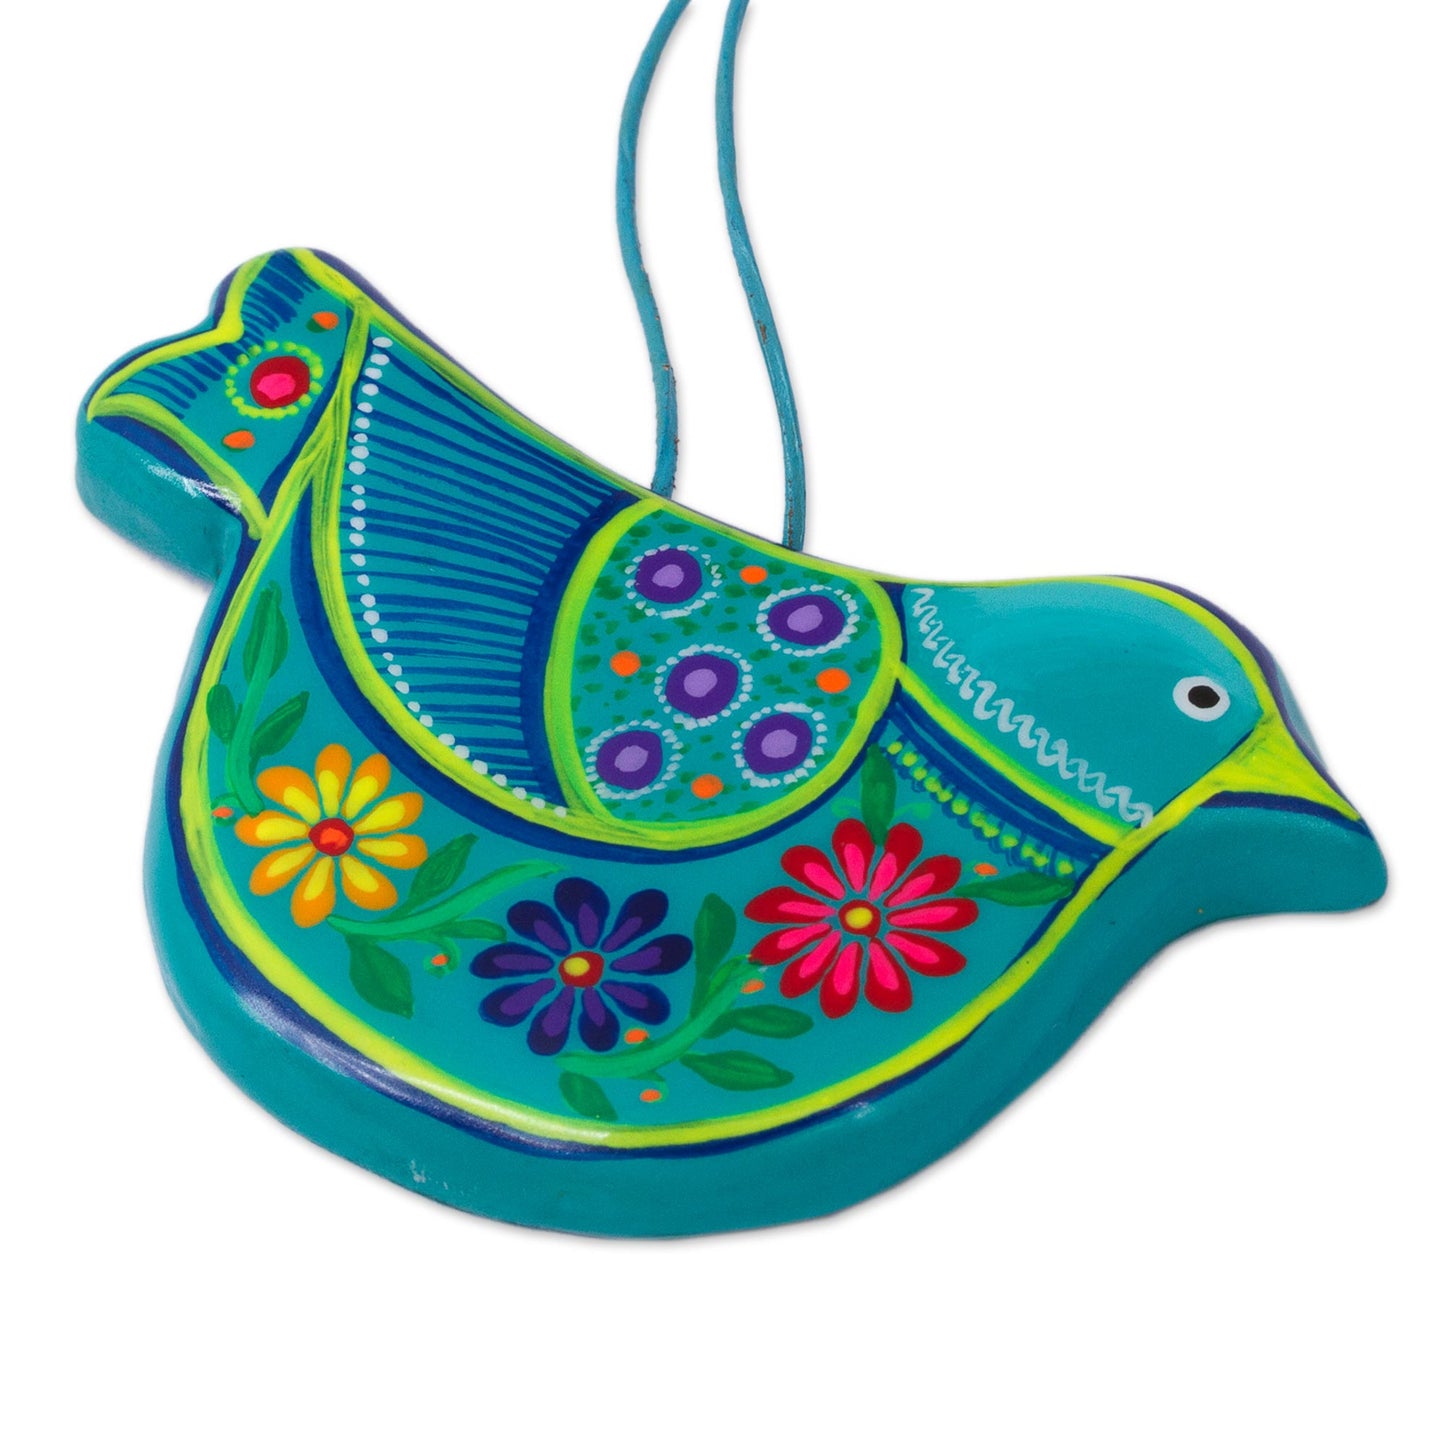 Turquoise Doves 2 Caribbean Blue Ceramic Handcrafted and Painted Ornaments